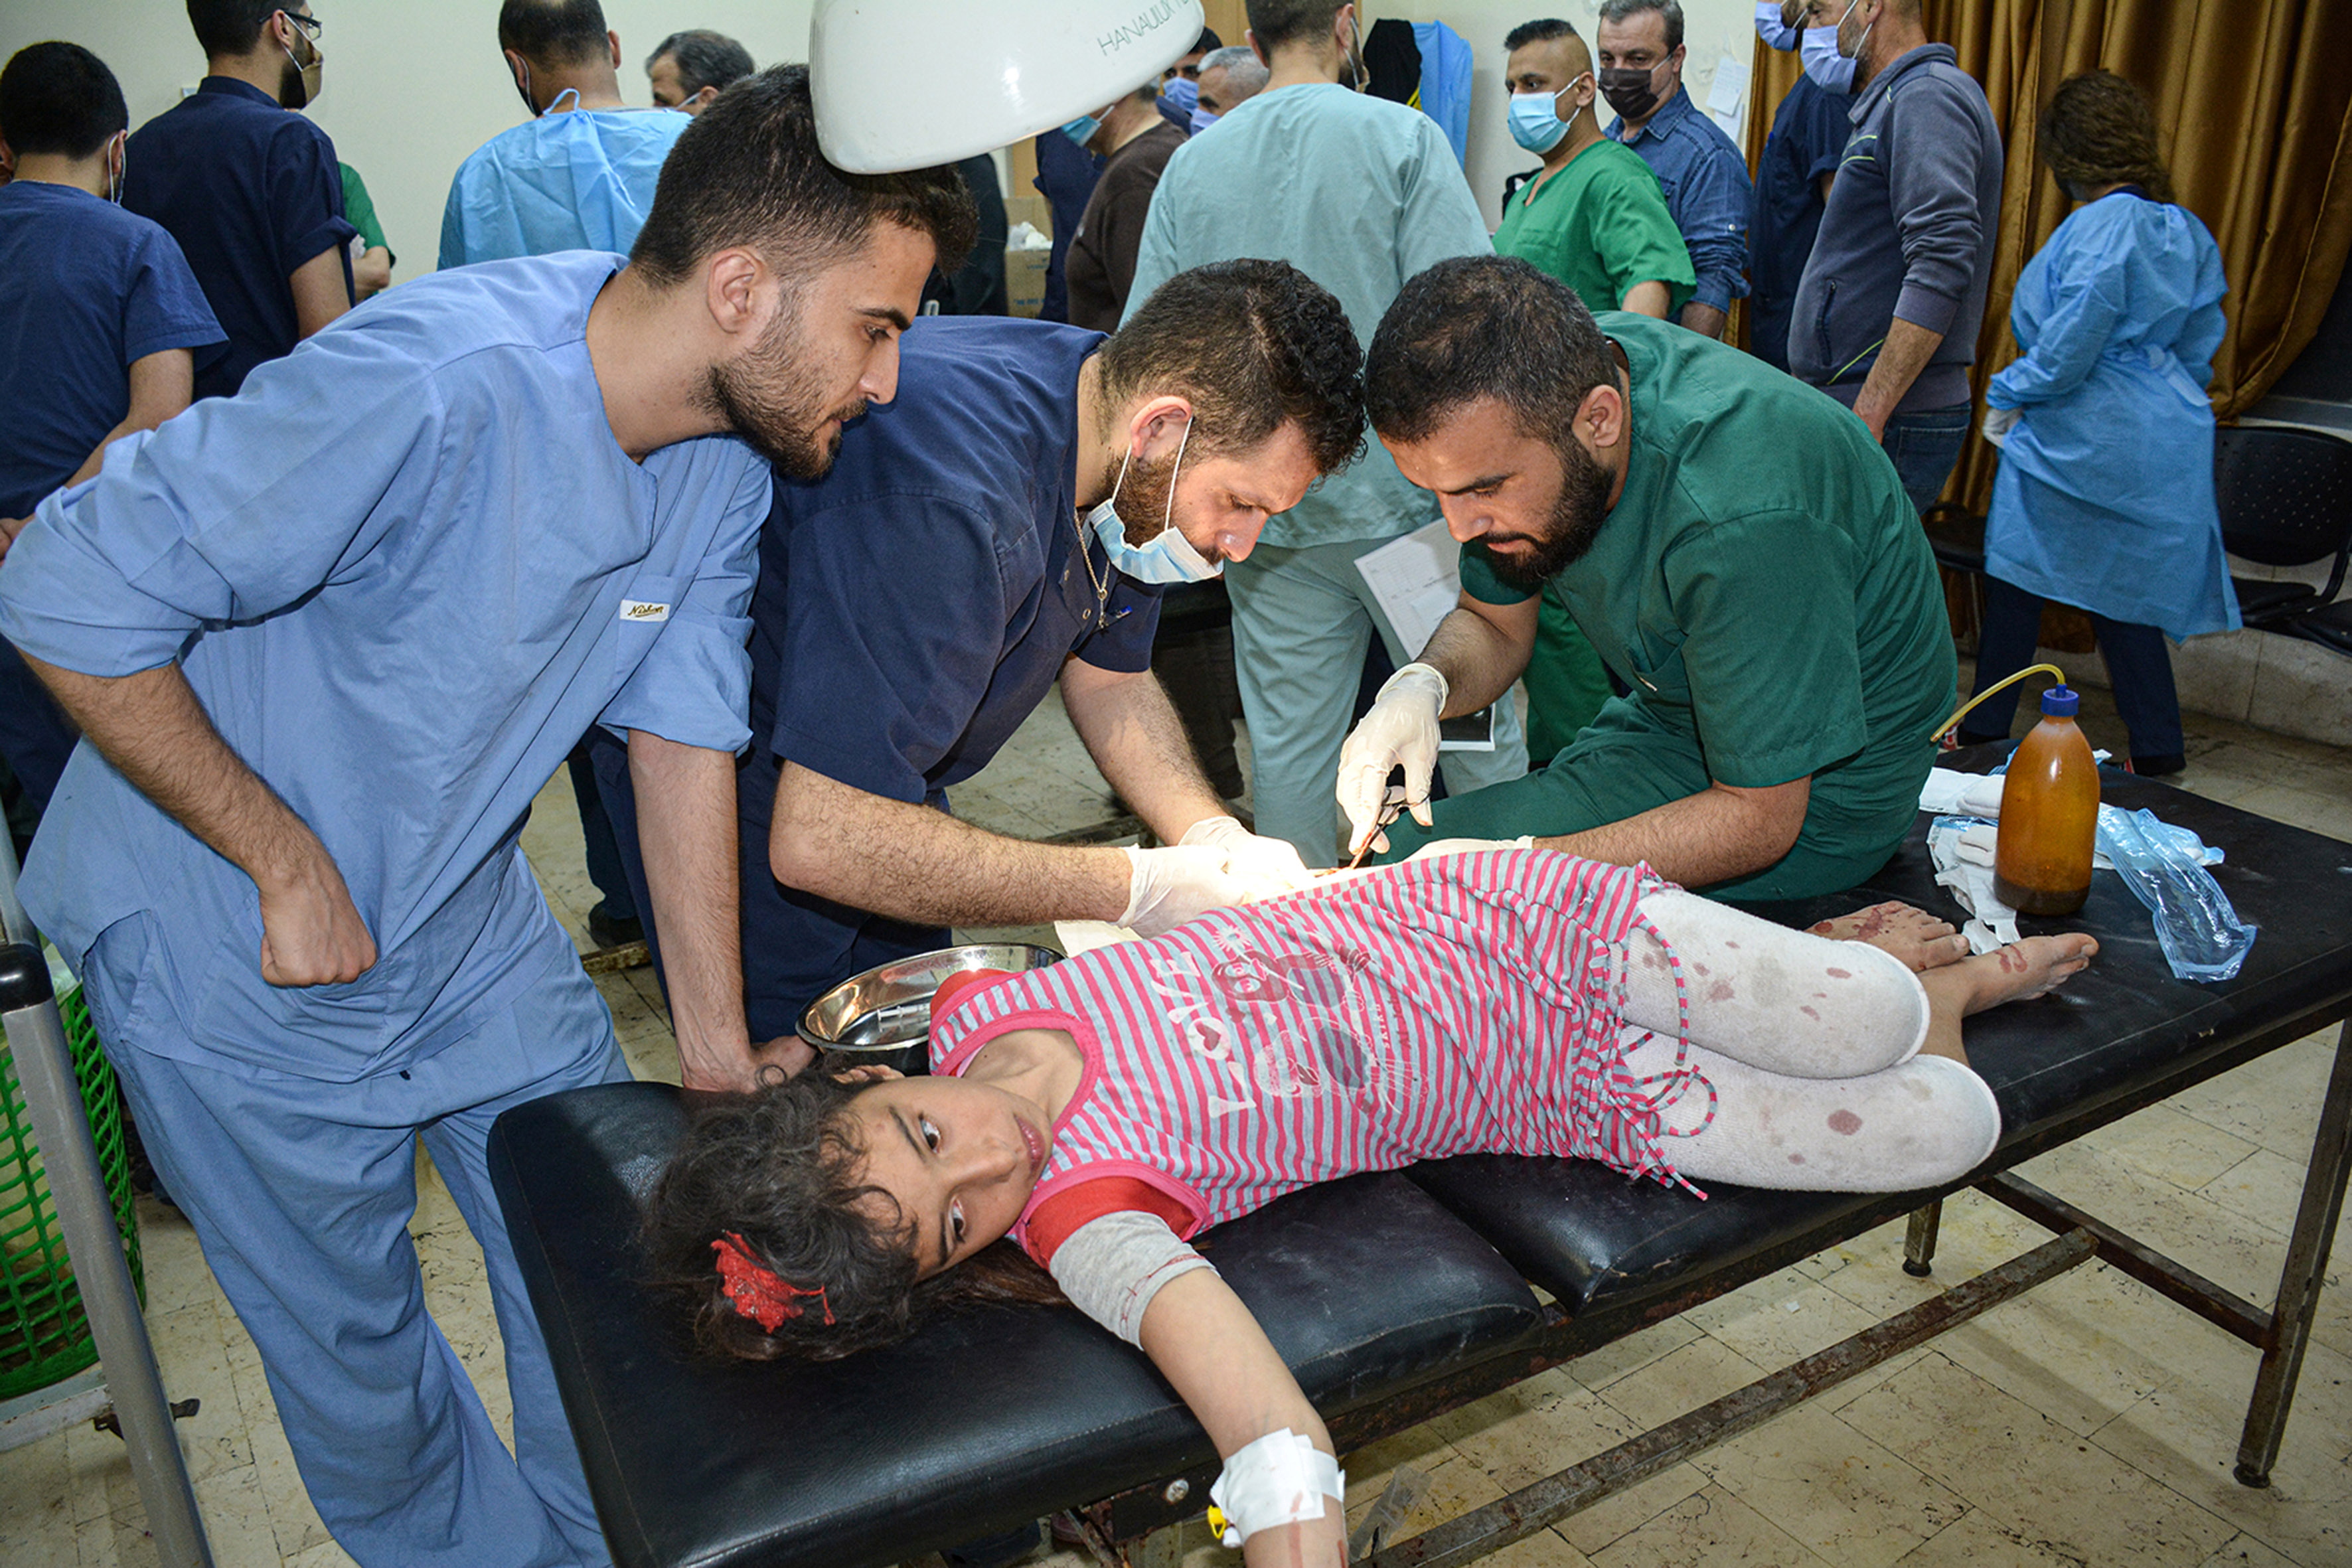 An injured girl is treated after pre-dawn raids on the Mediterranean port region of Latakia